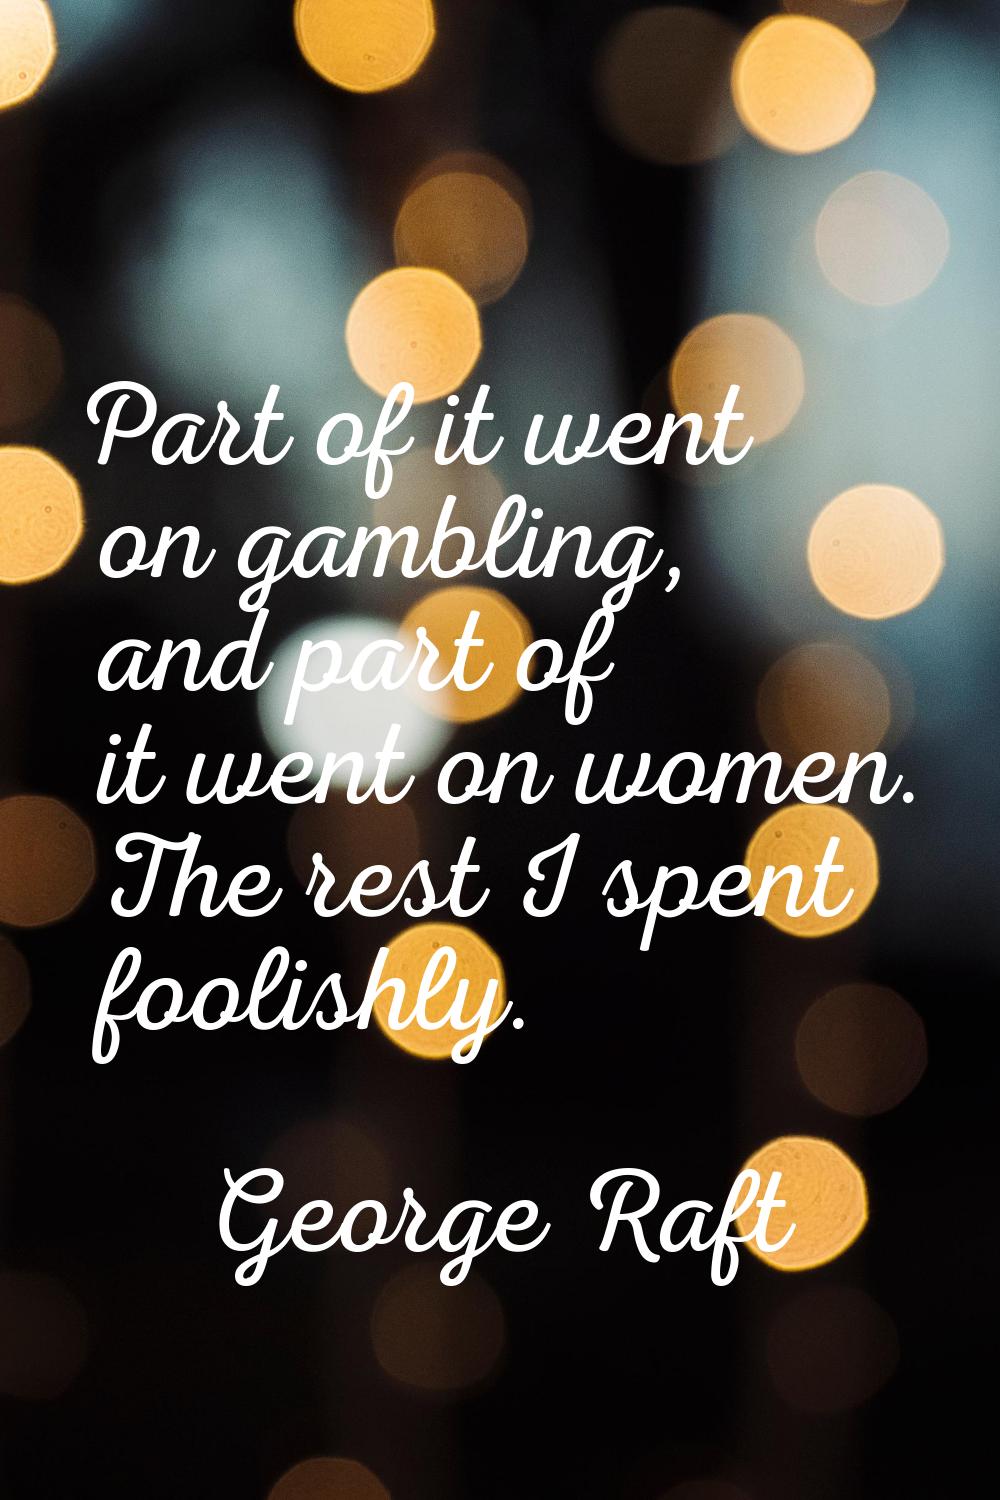 Part of it went on gambling, and part of it went on women. The rest I spent foolishly.